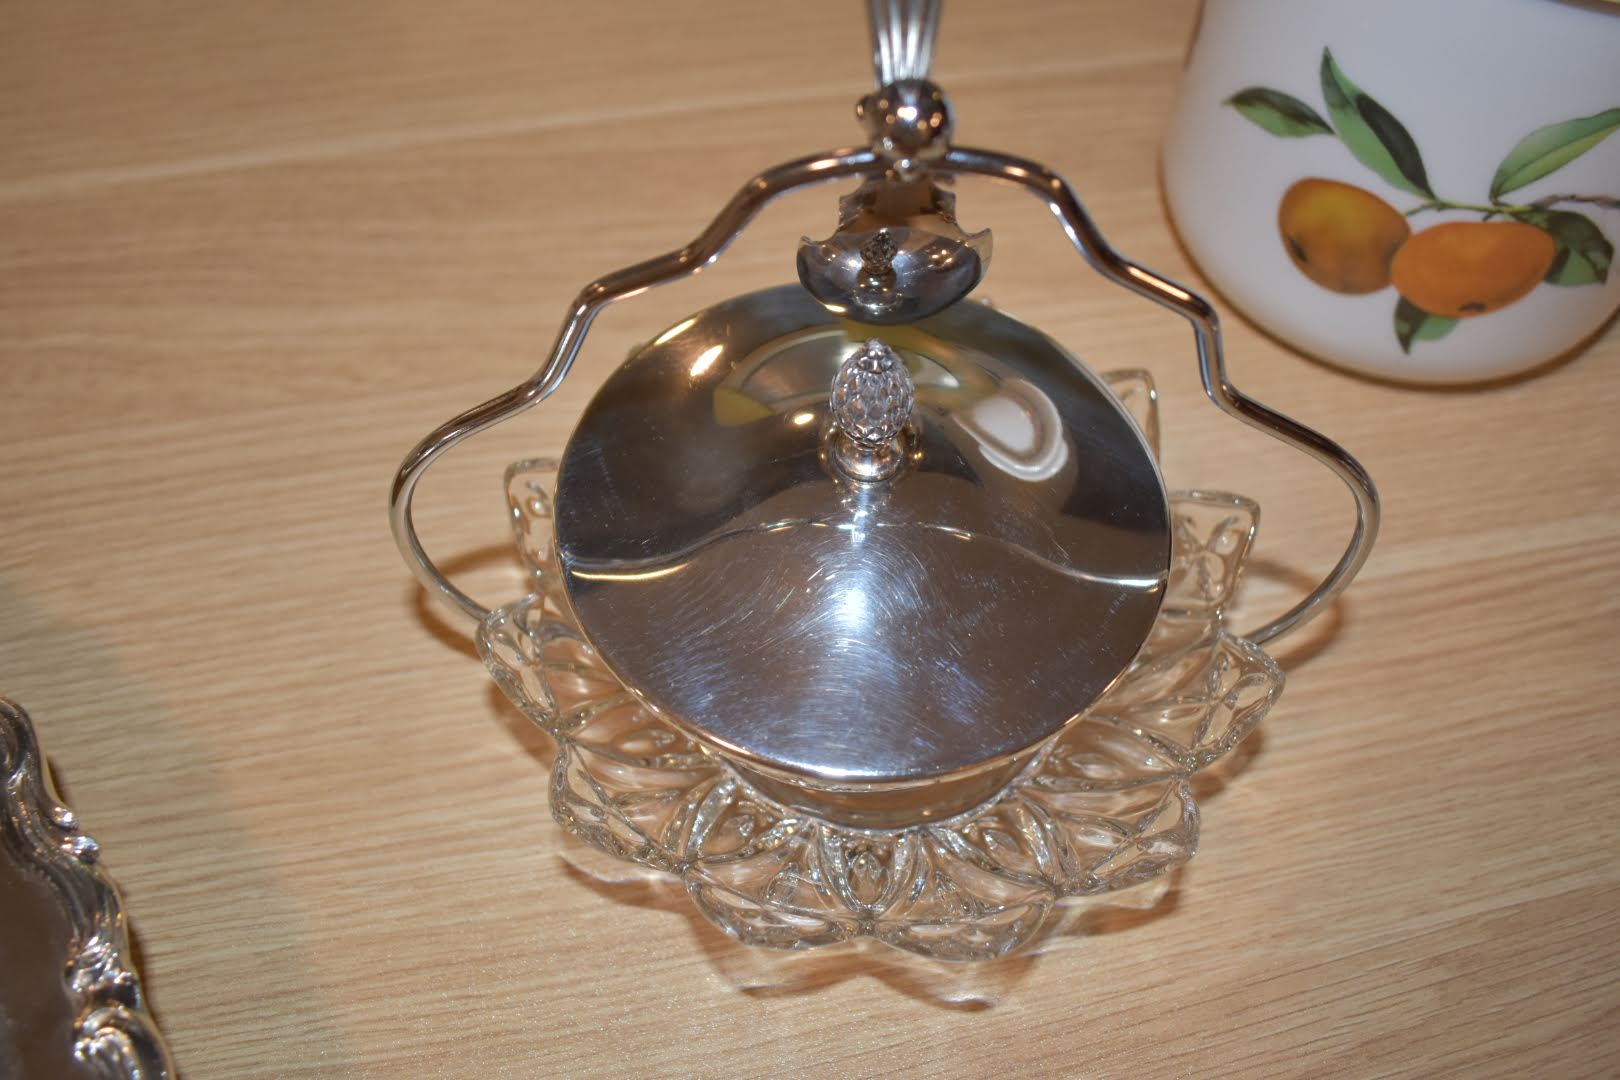 Silver Plated Condiment Bowl With Holder , Spoon And Crystal Glass Plate - Tray 9